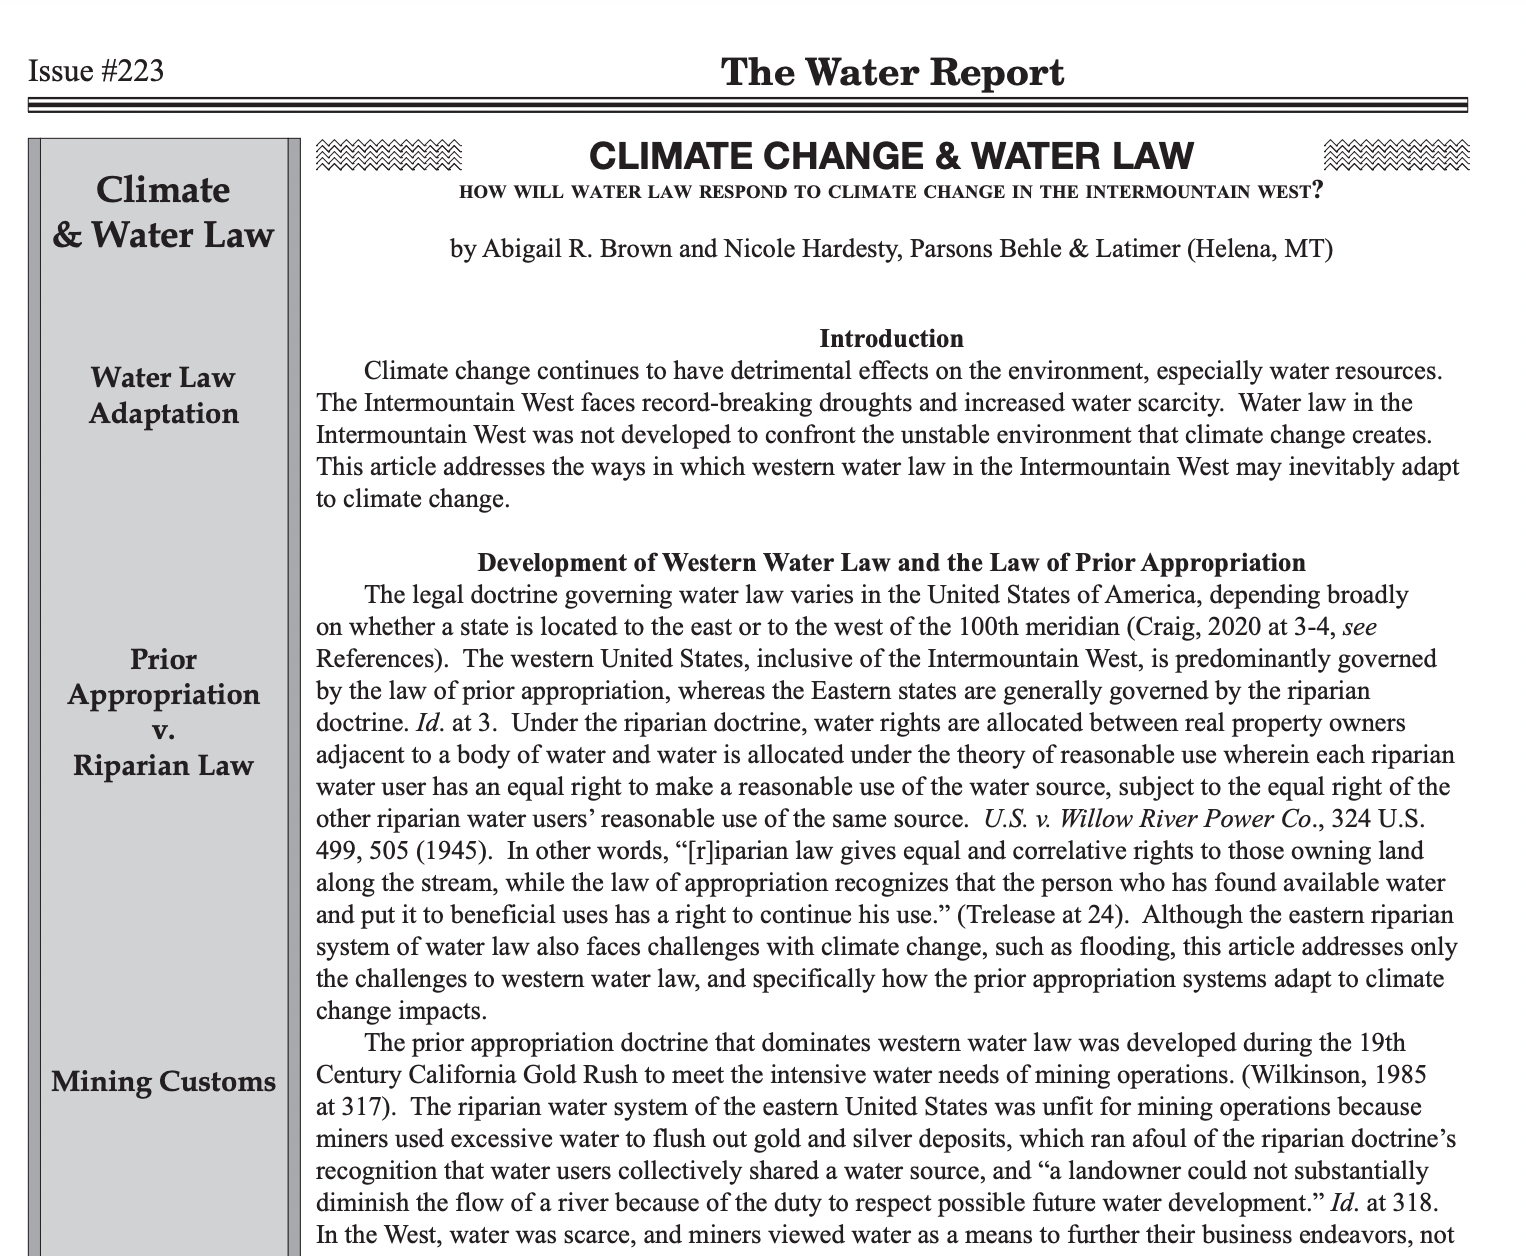 Climate Change and Water Law